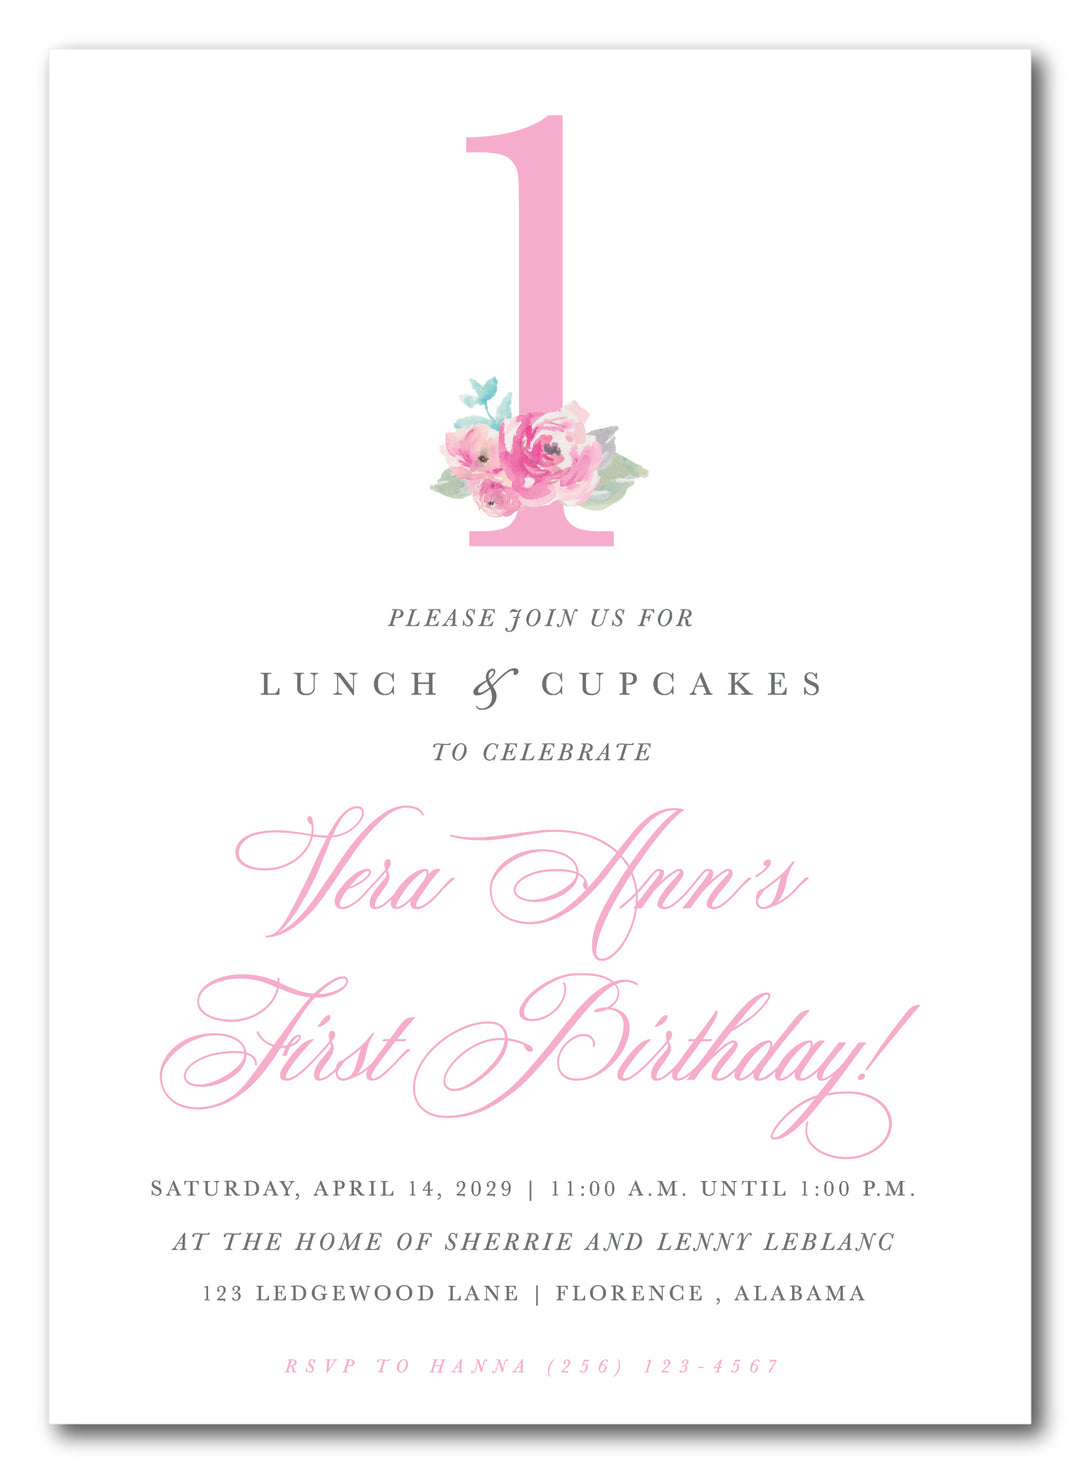 The Floral Number II Birthday Party Invitation